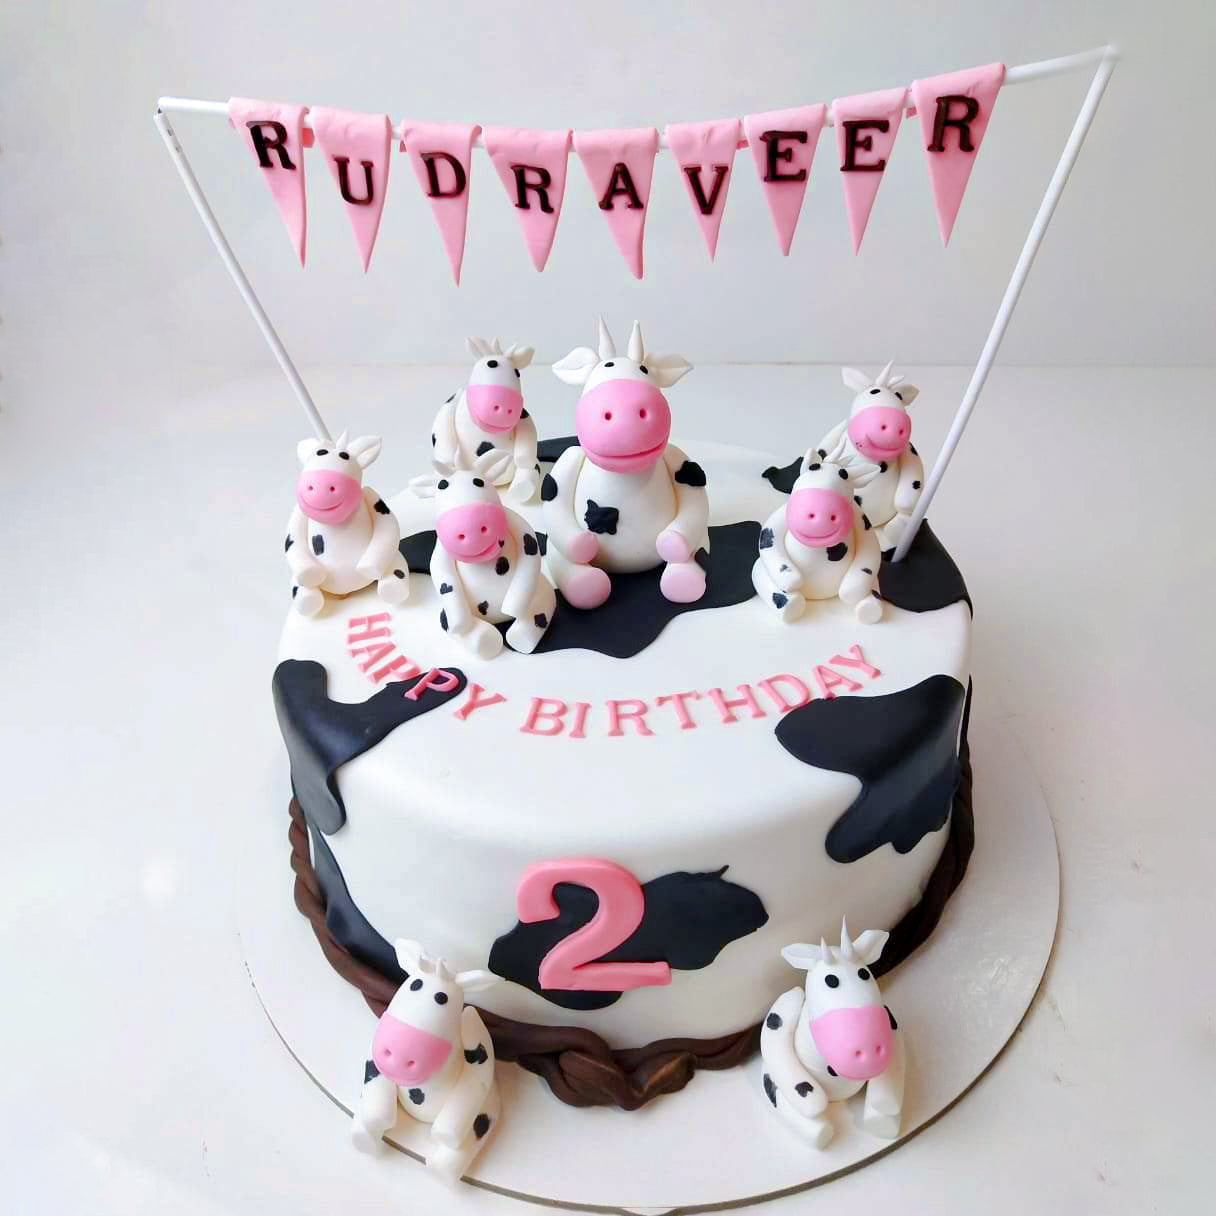 Discover more than 155 beautiful cake hd images latest - in.eteachers